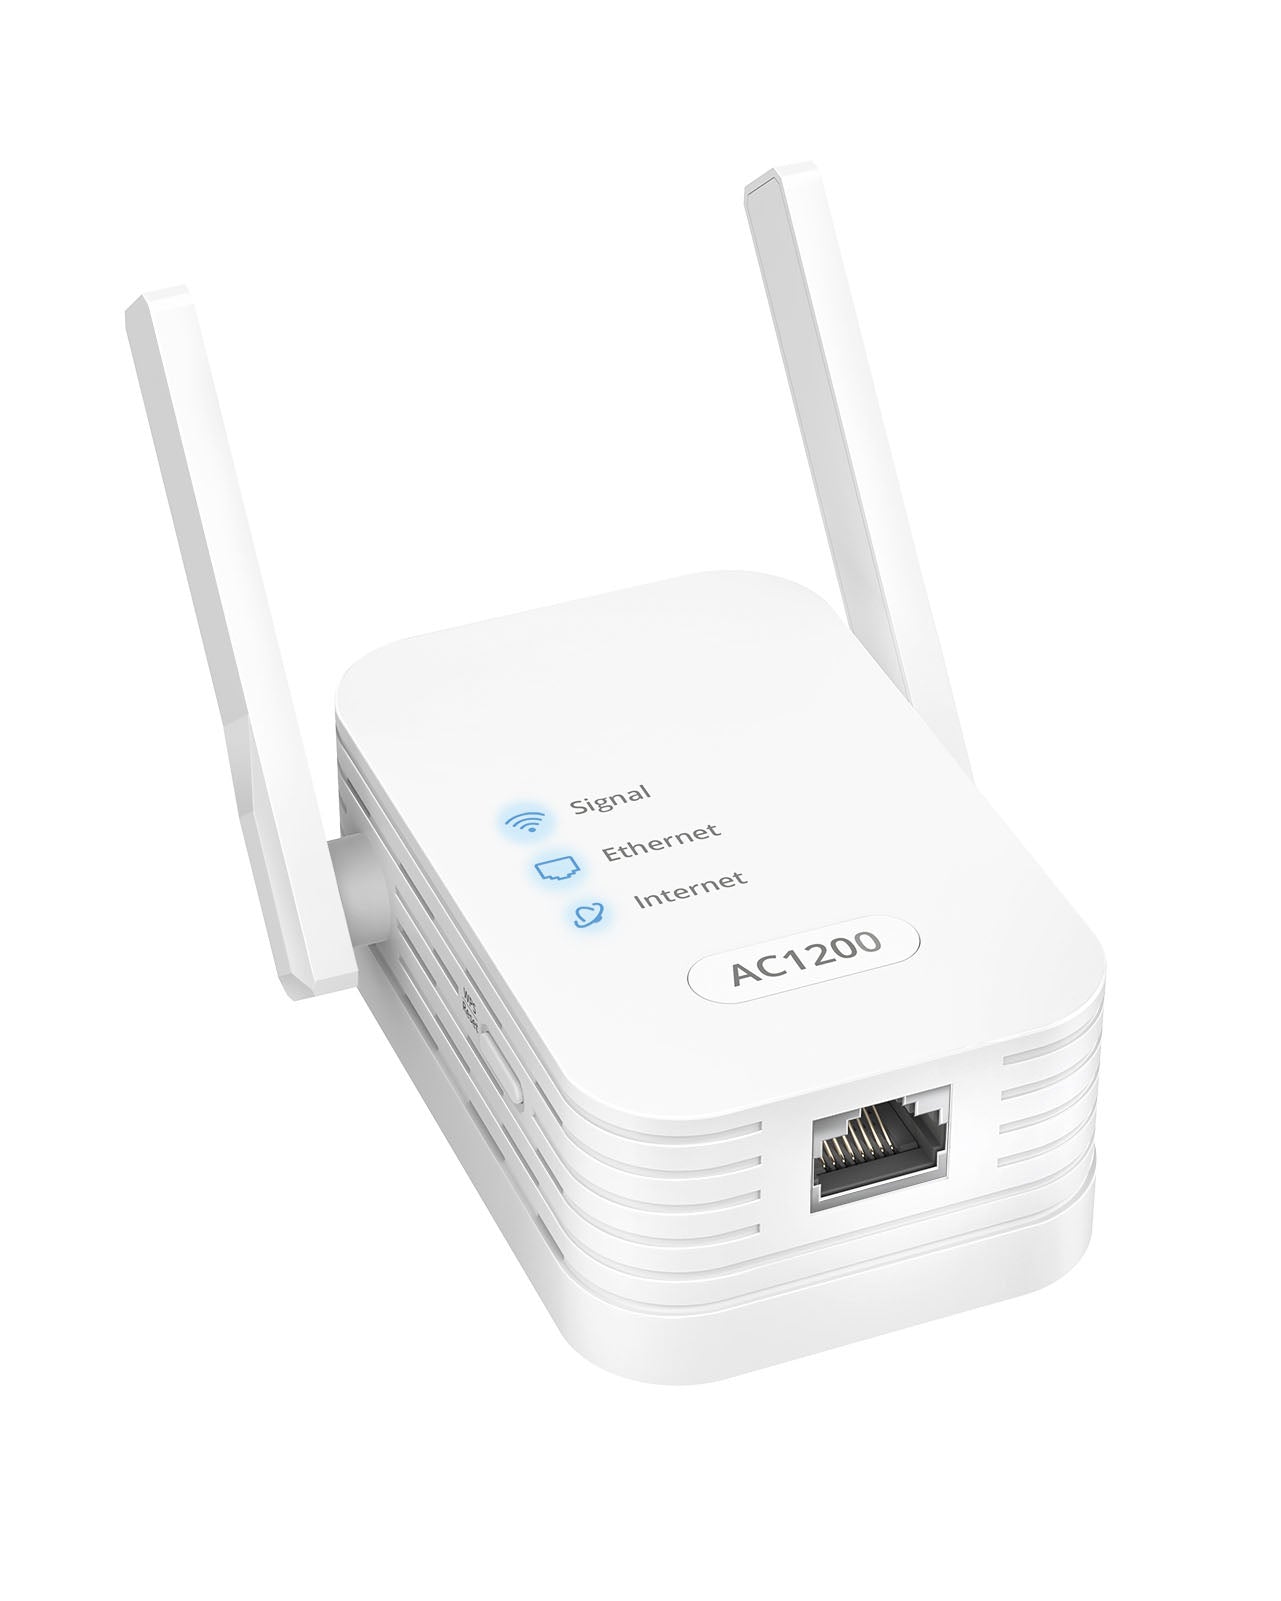 AC1200 WiFi to Ethernet Adapter